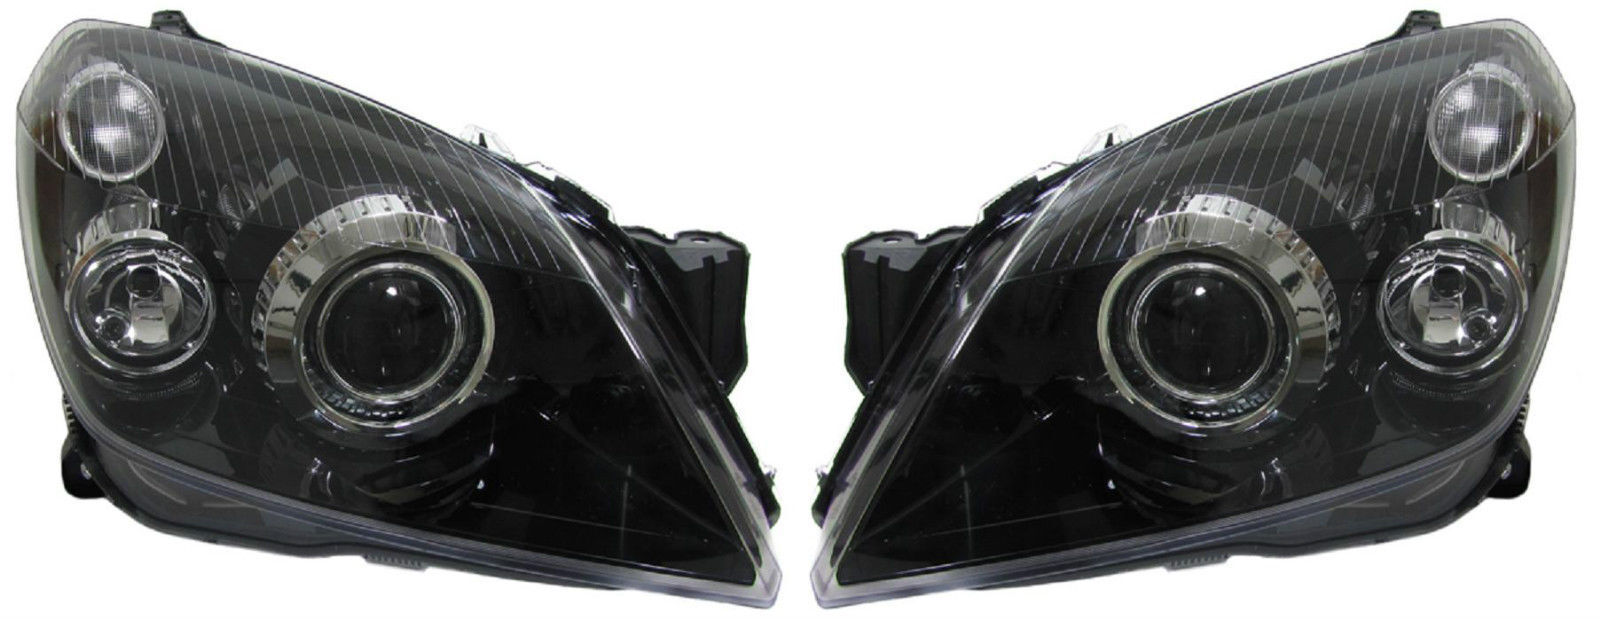 Clear black projector XENON headlights front lights for Opel Astra H 04-10    